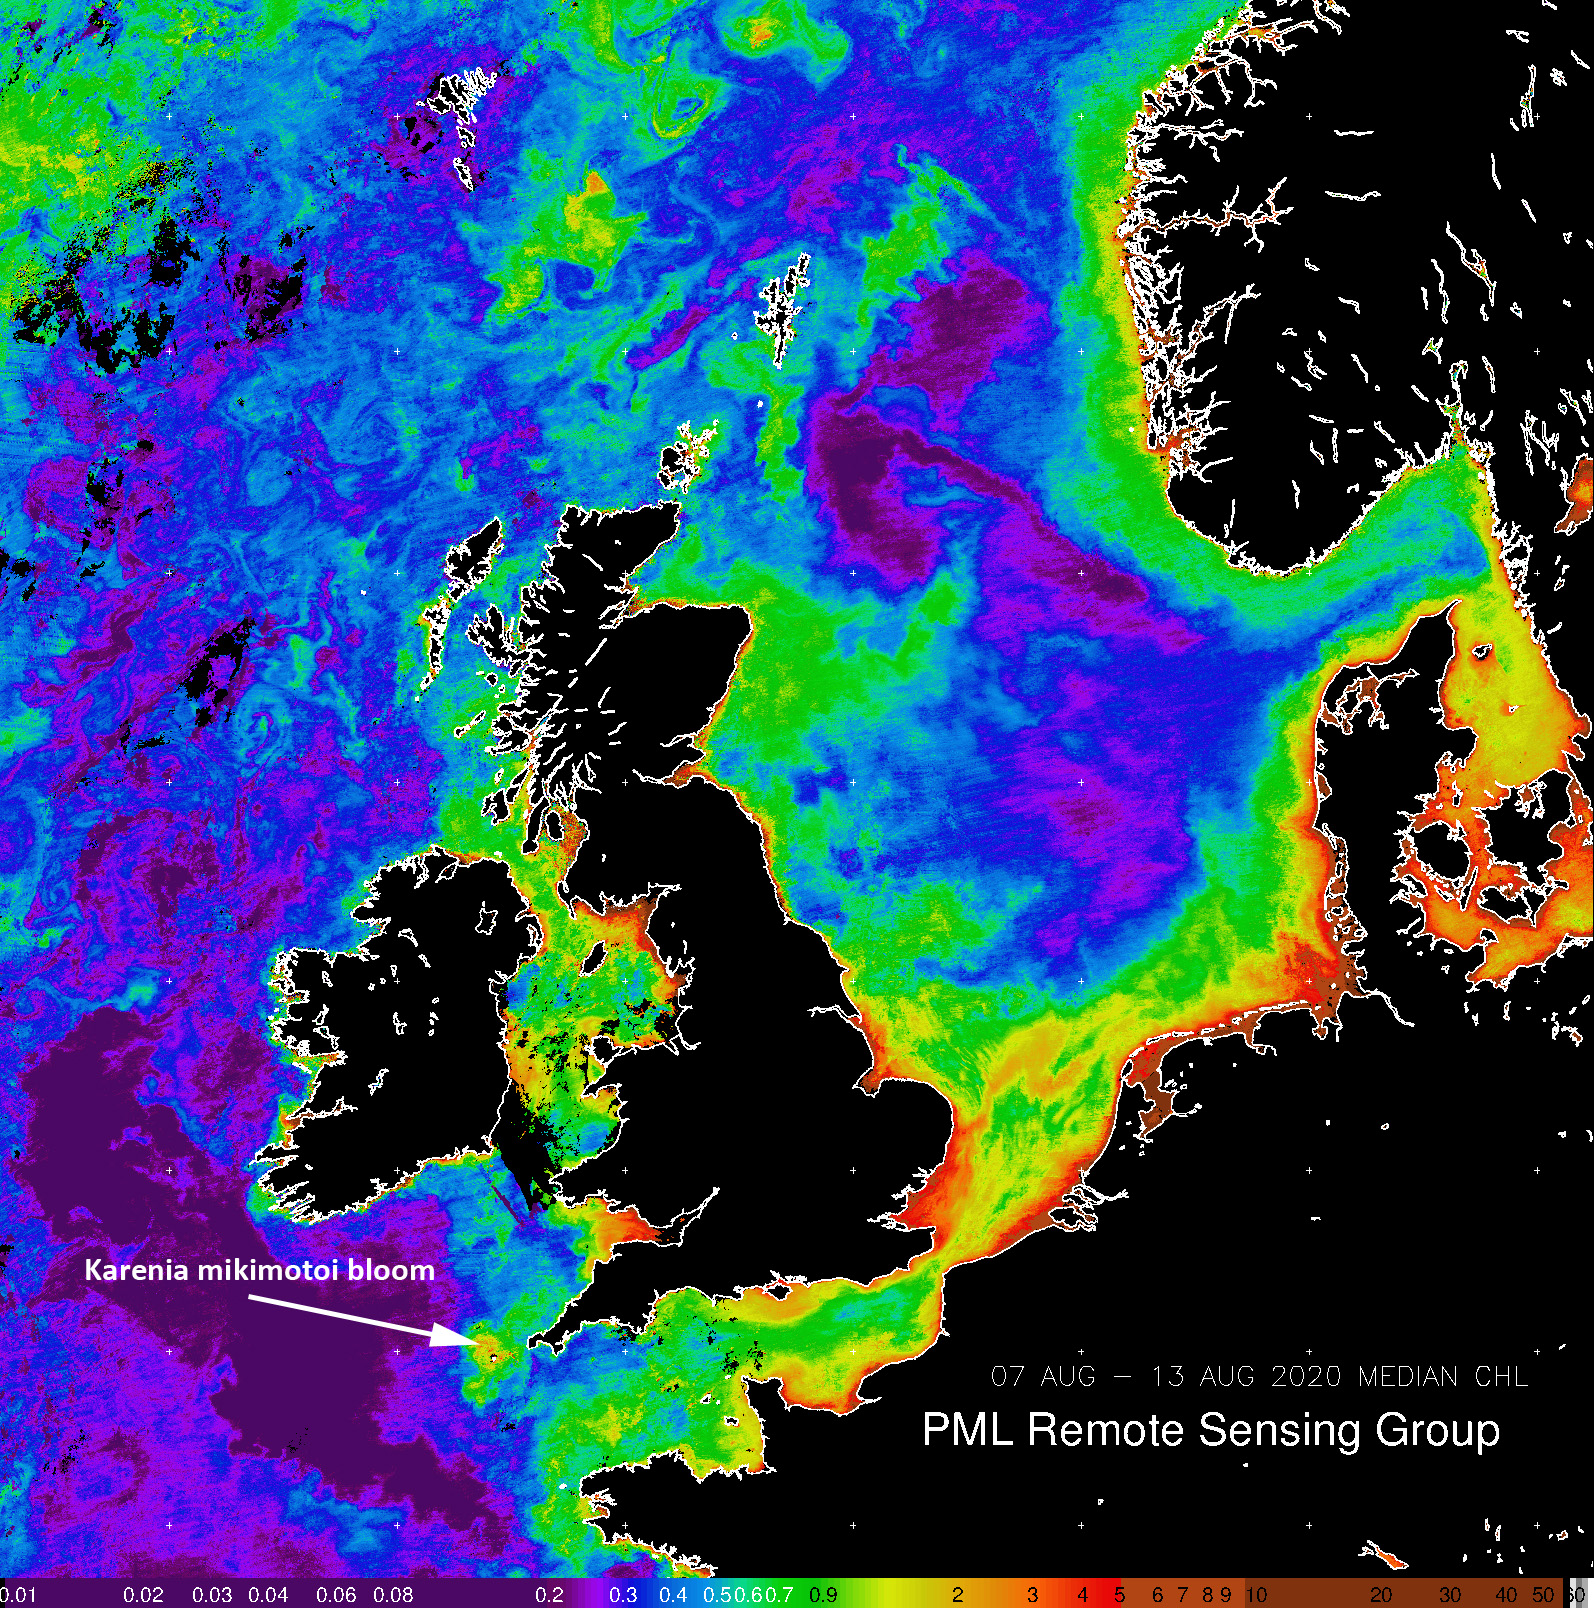 Satellite image showing Chlorophyll-a concentrations, which can be used to detect blooms. Produced by NEODAAS from data collected by the VIIRS sensor onboard a the National Oceanic and Atmospheric Administration (NOAA) SUOMI satellite.